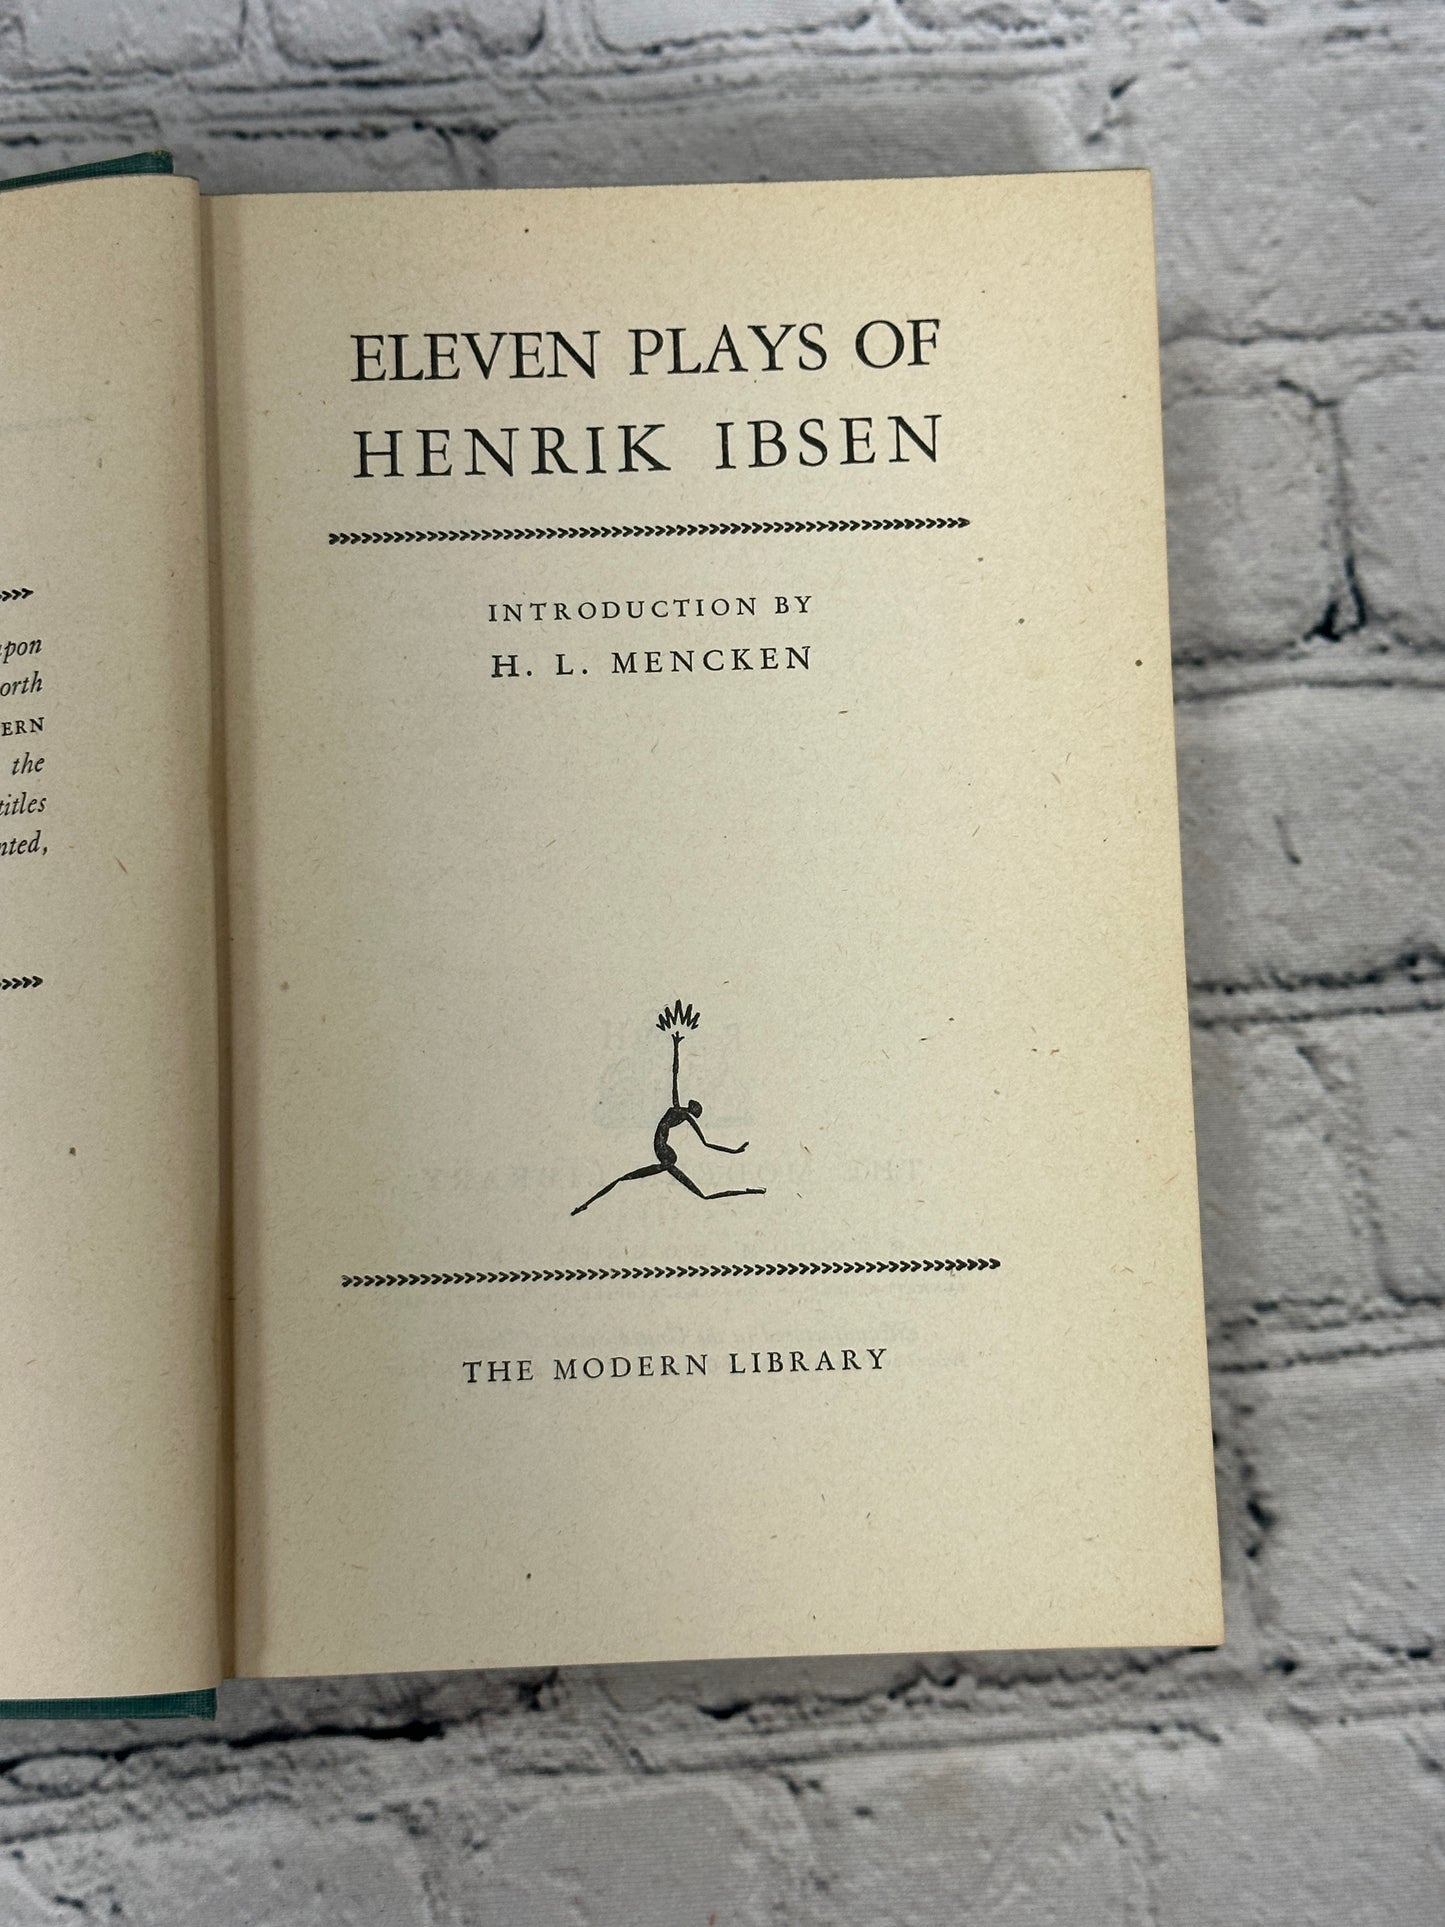 Eleven Plays of Henrik Ibsen [The Modern Library]